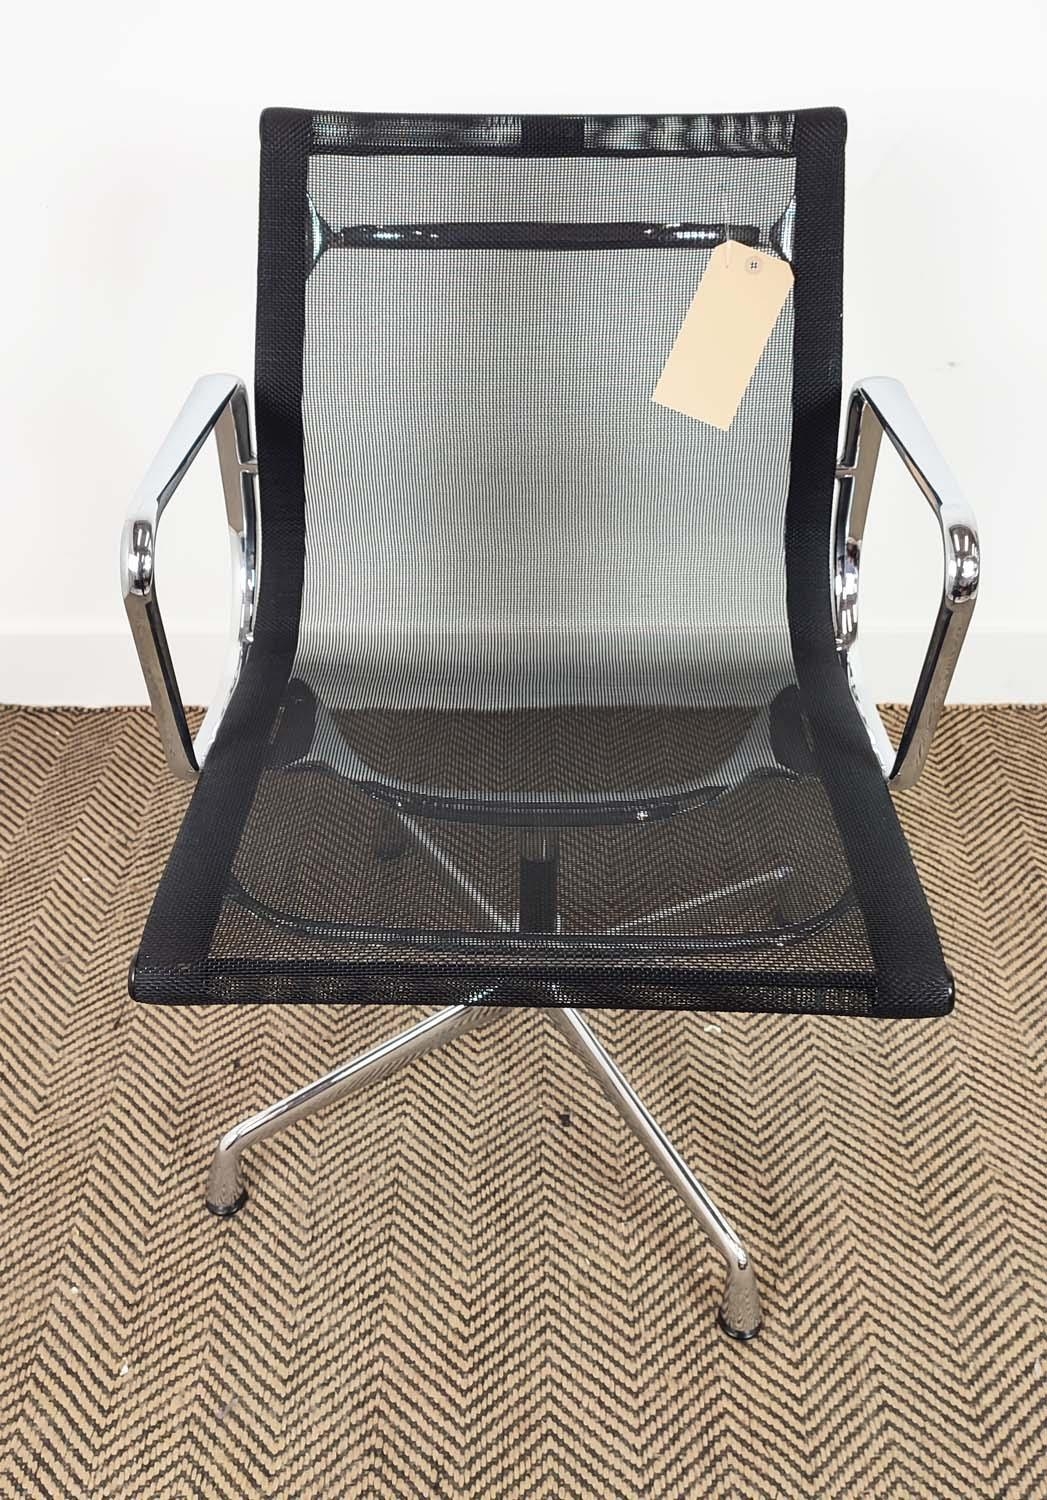 VITRA ALUMINIUM GROUP CHAIR, designed by Charles and Ray Eames, 57cm W x 85cm H, bears label. - Bild 3 aus 6